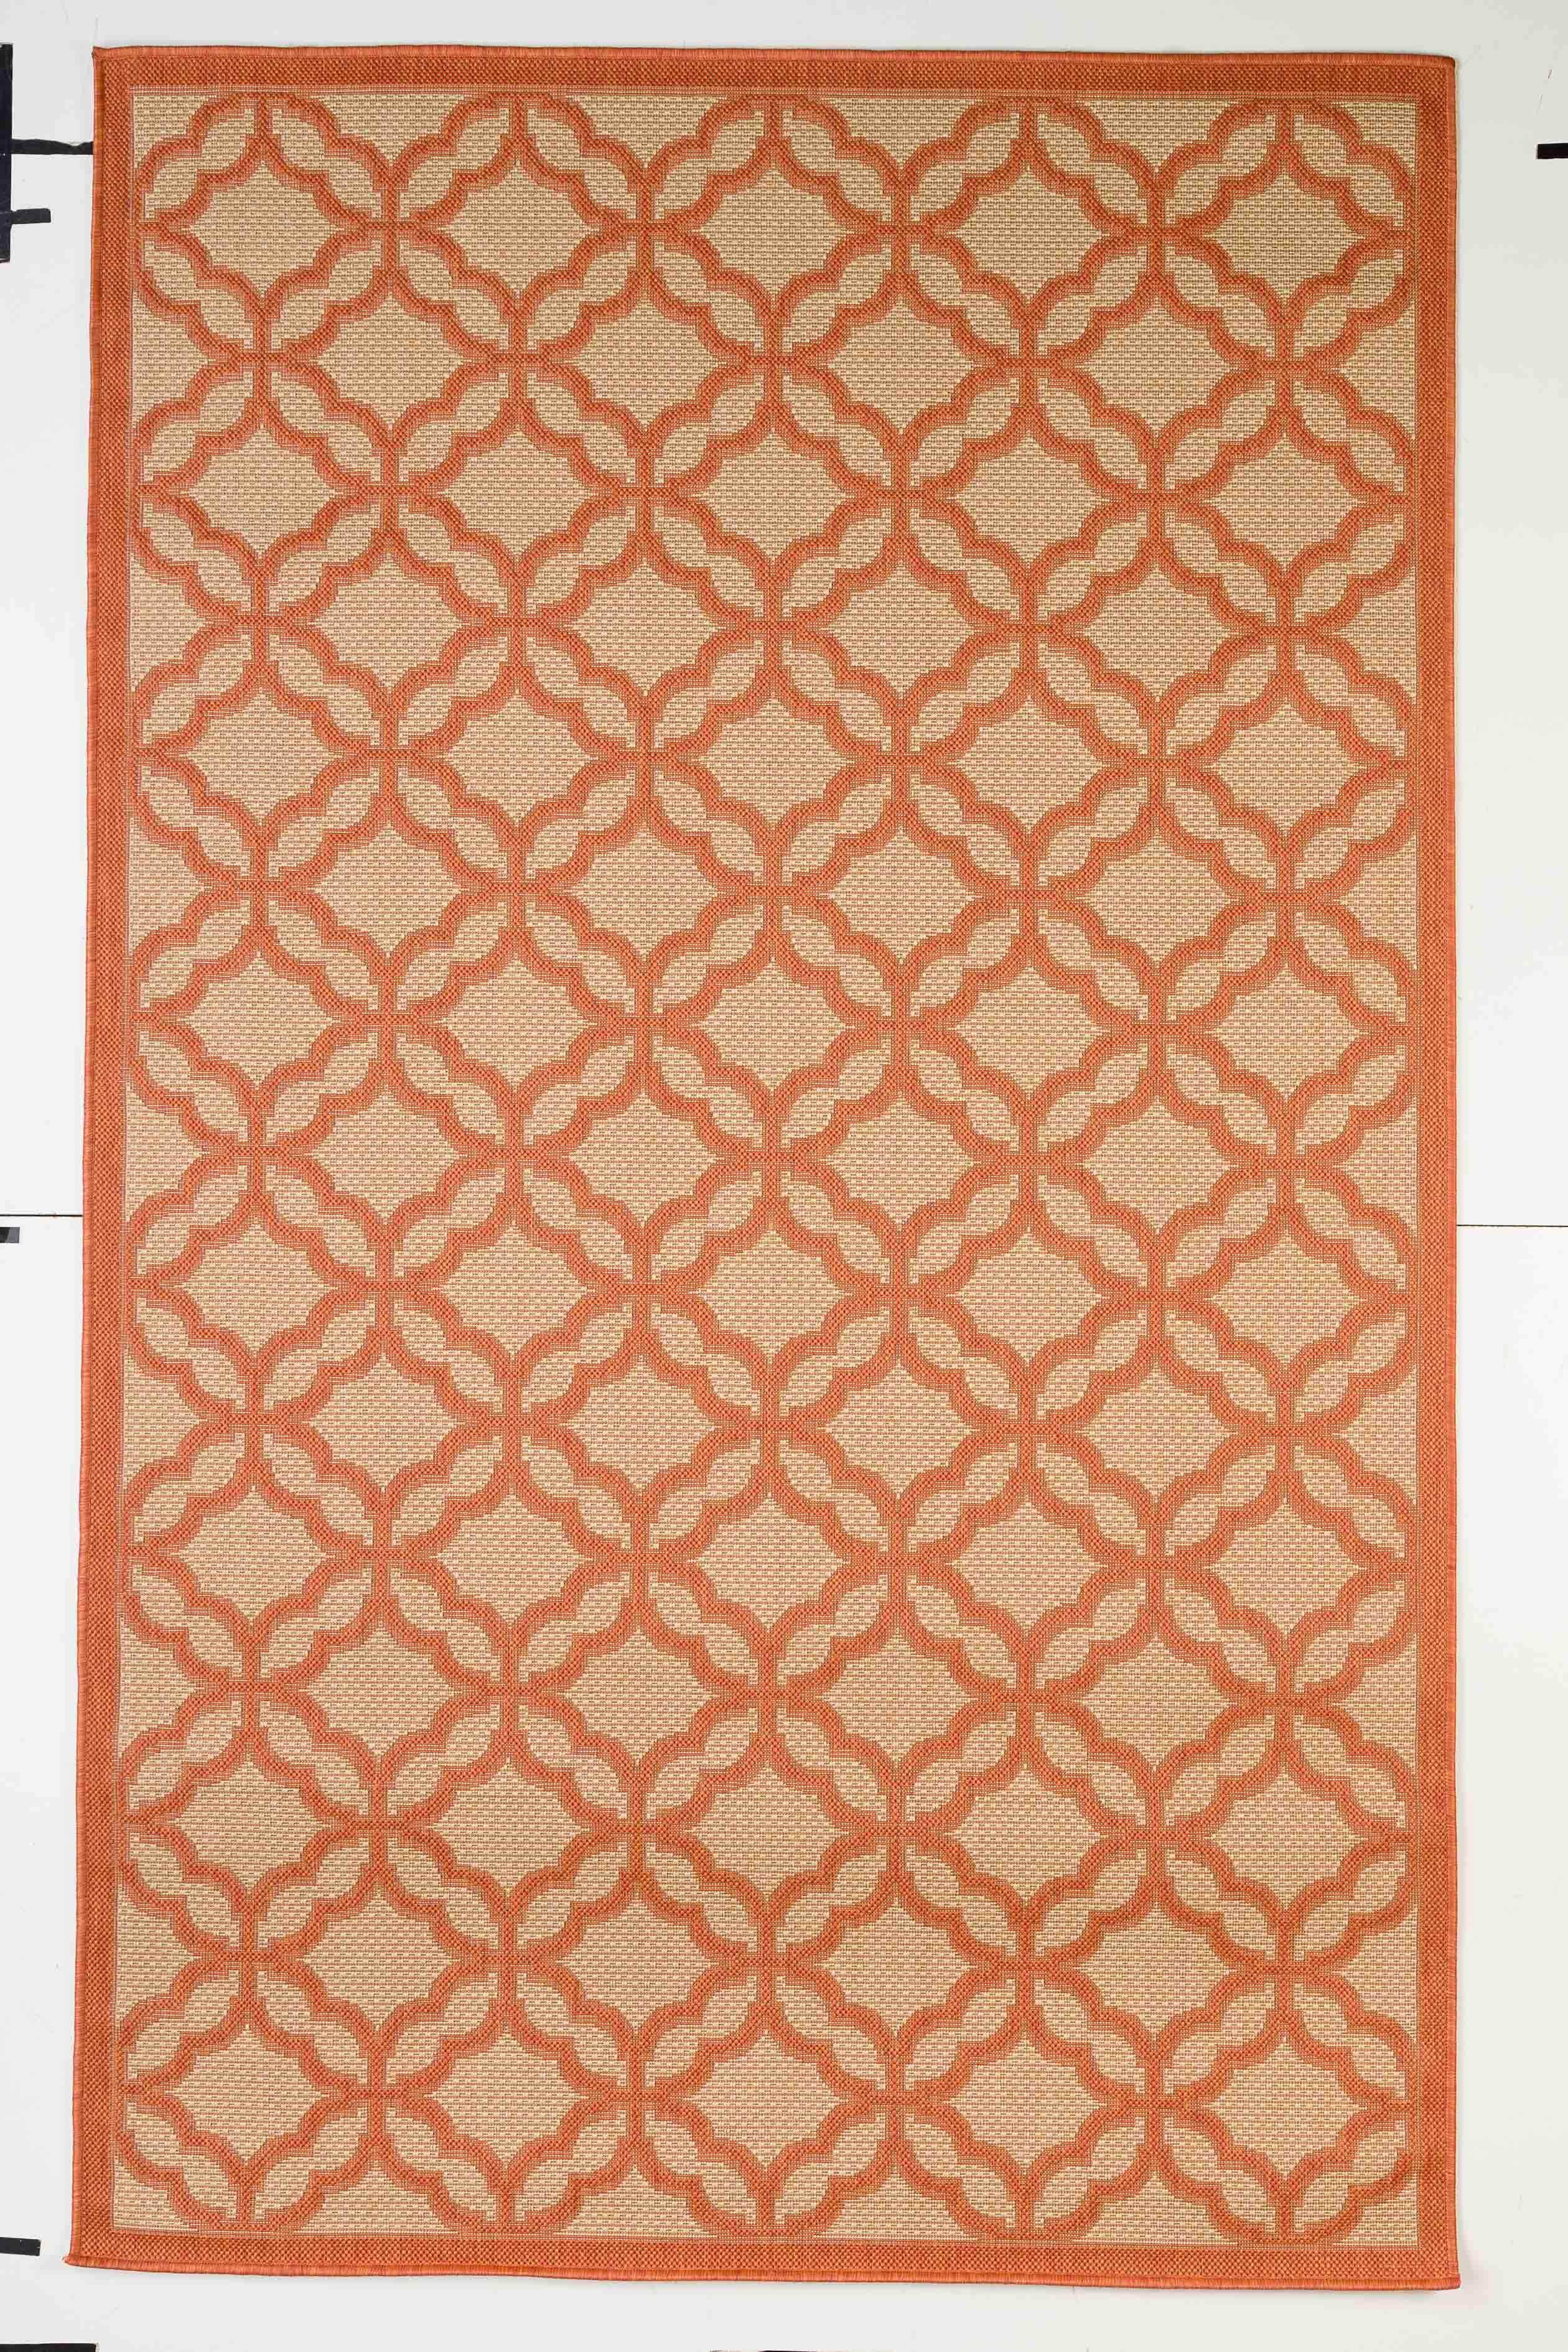 Festival Indoor/Outdoor Rugs Flatweave Contemporary Patio, Pool, Camp and Picnic Carpets FW 550 - Context USA - Area Rug by MSRUGS